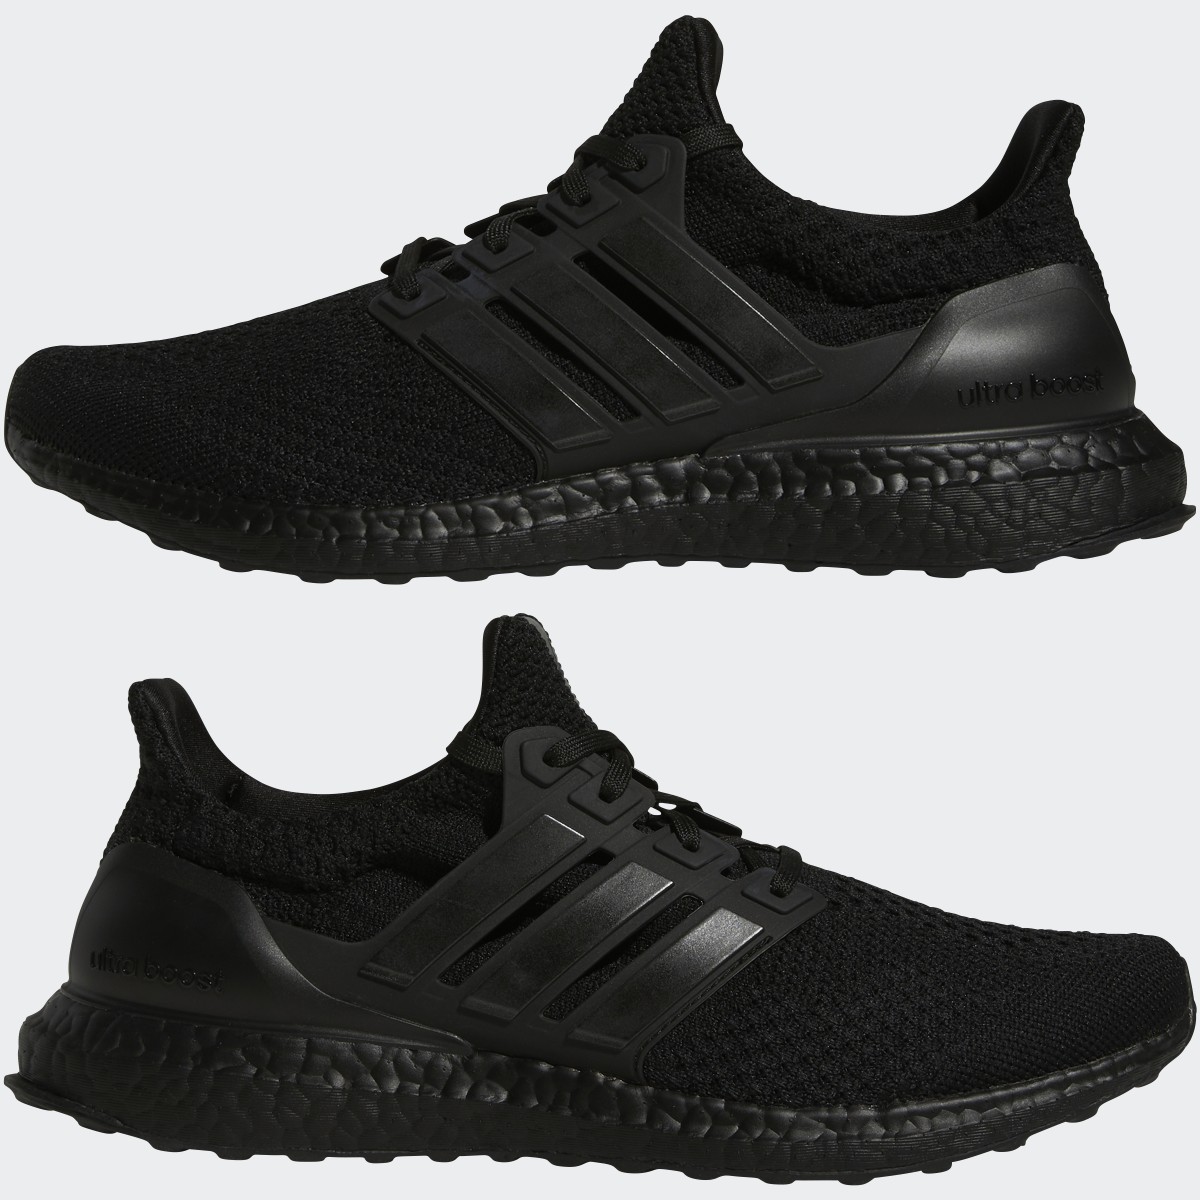 Adidas Ultraboost 5 DNA Running Lifestyle Shoes. 8